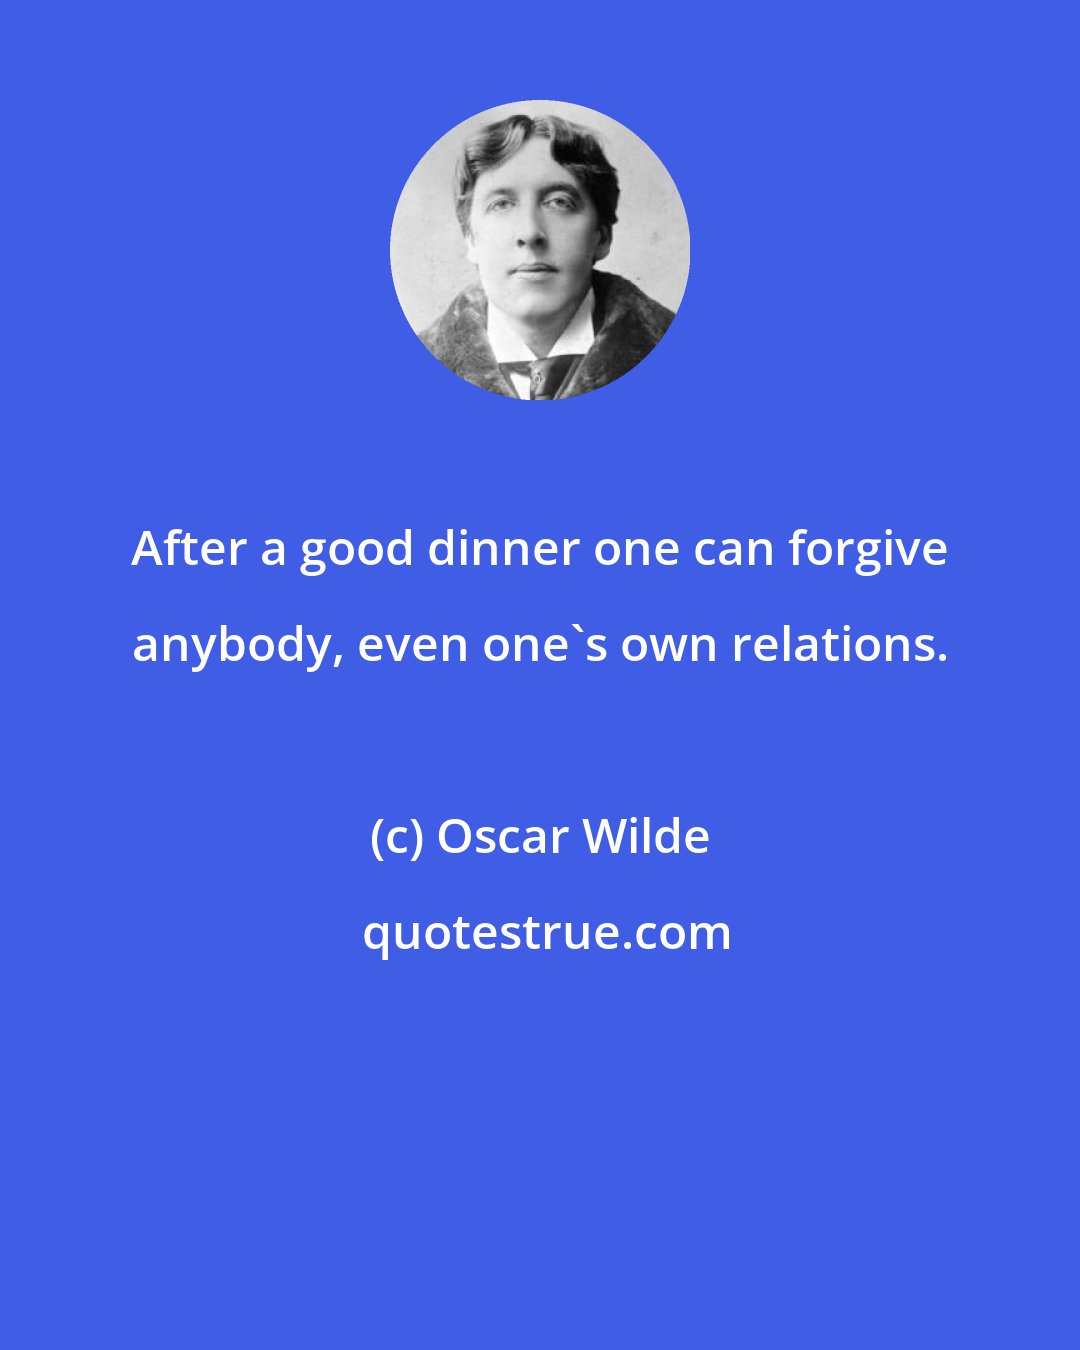 Oscar Wilde: After a good dinner one can forgive anybody, even one's own relations.